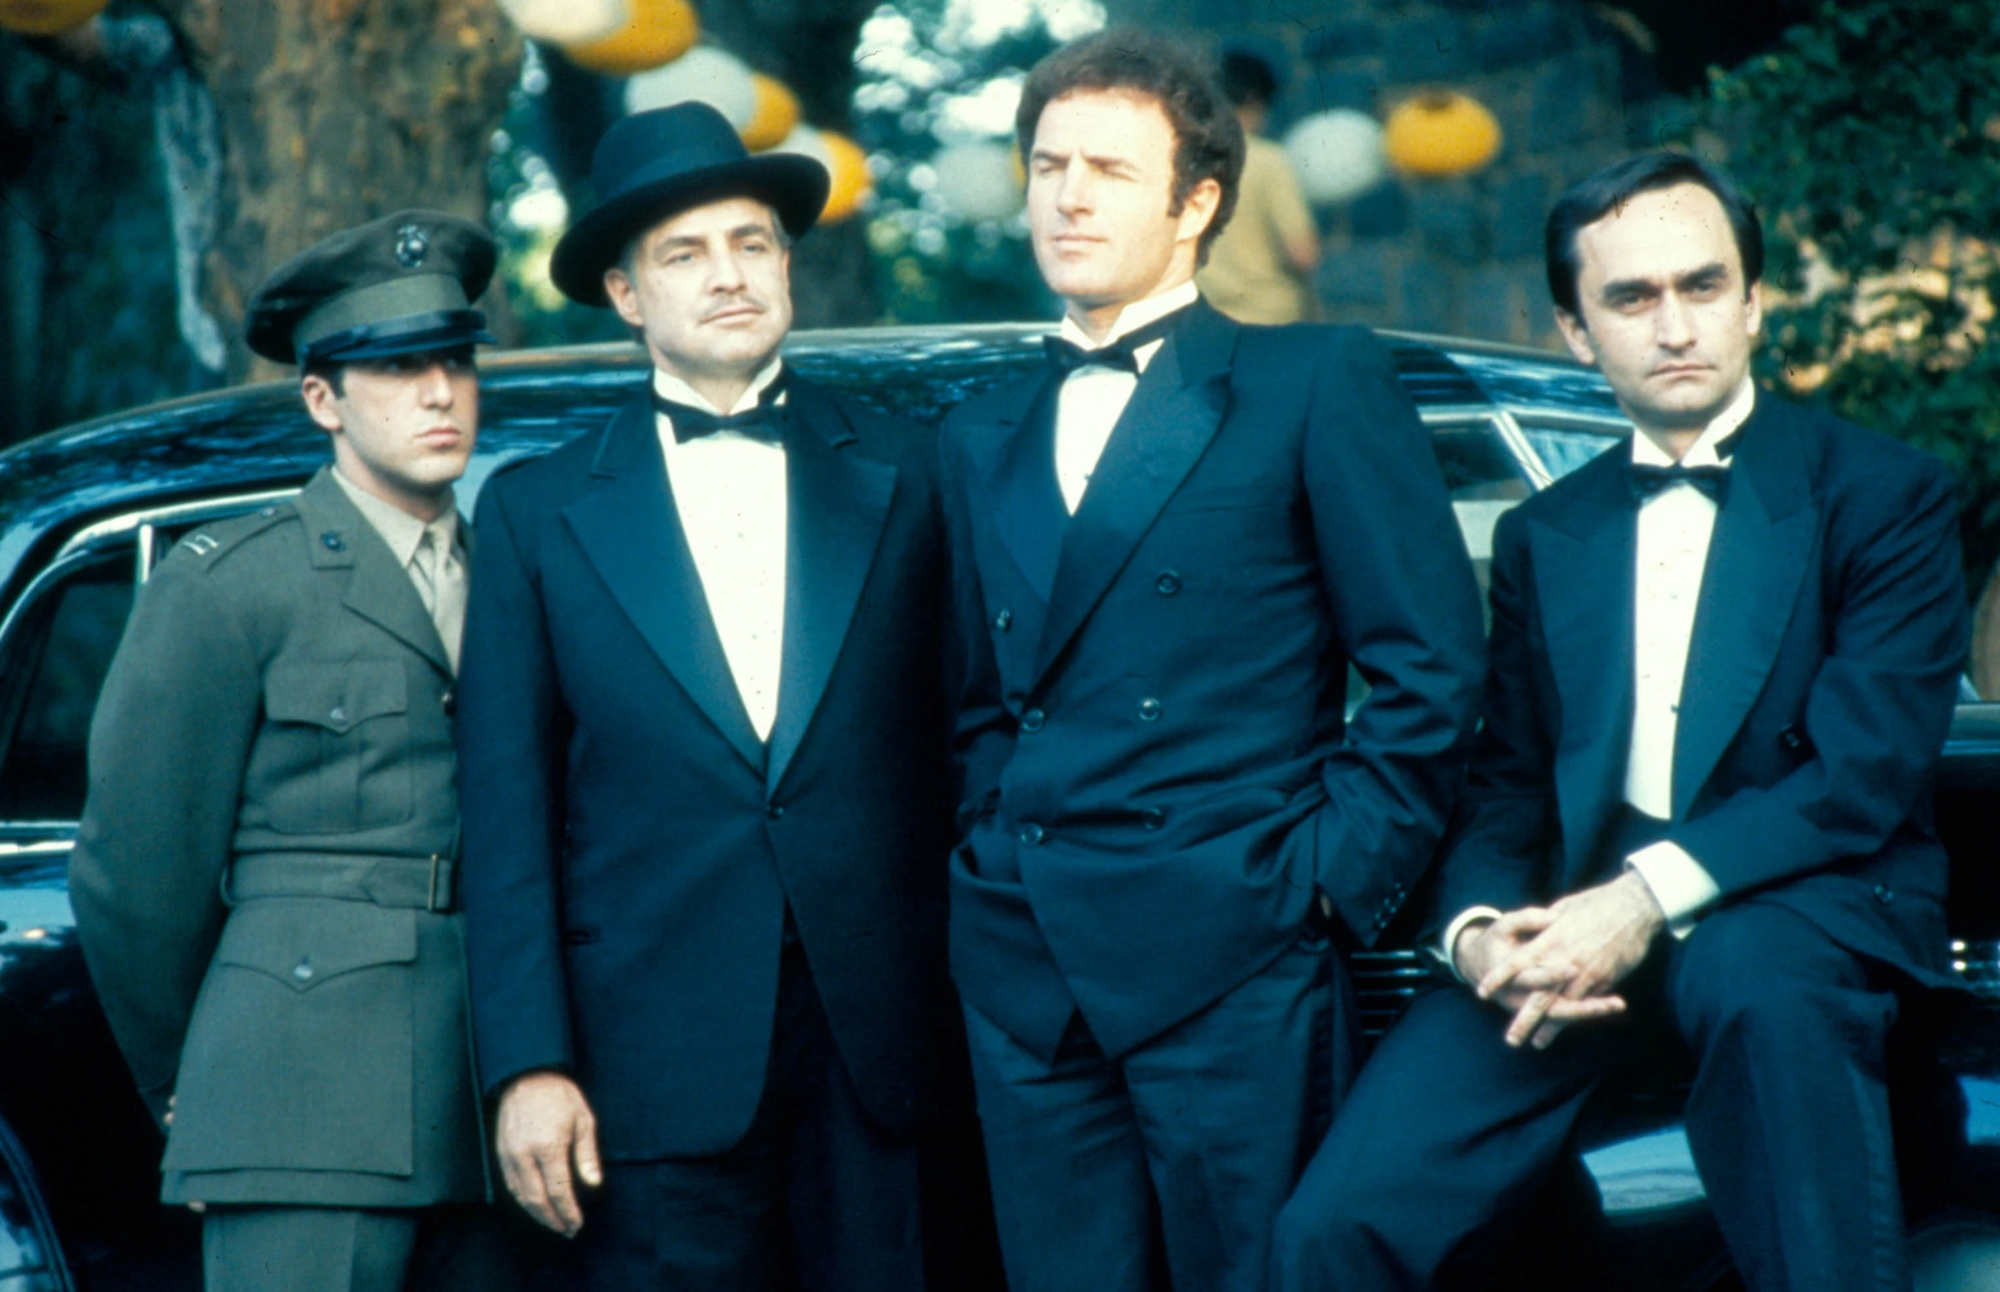 An image with Vito Corleone and all of his sons